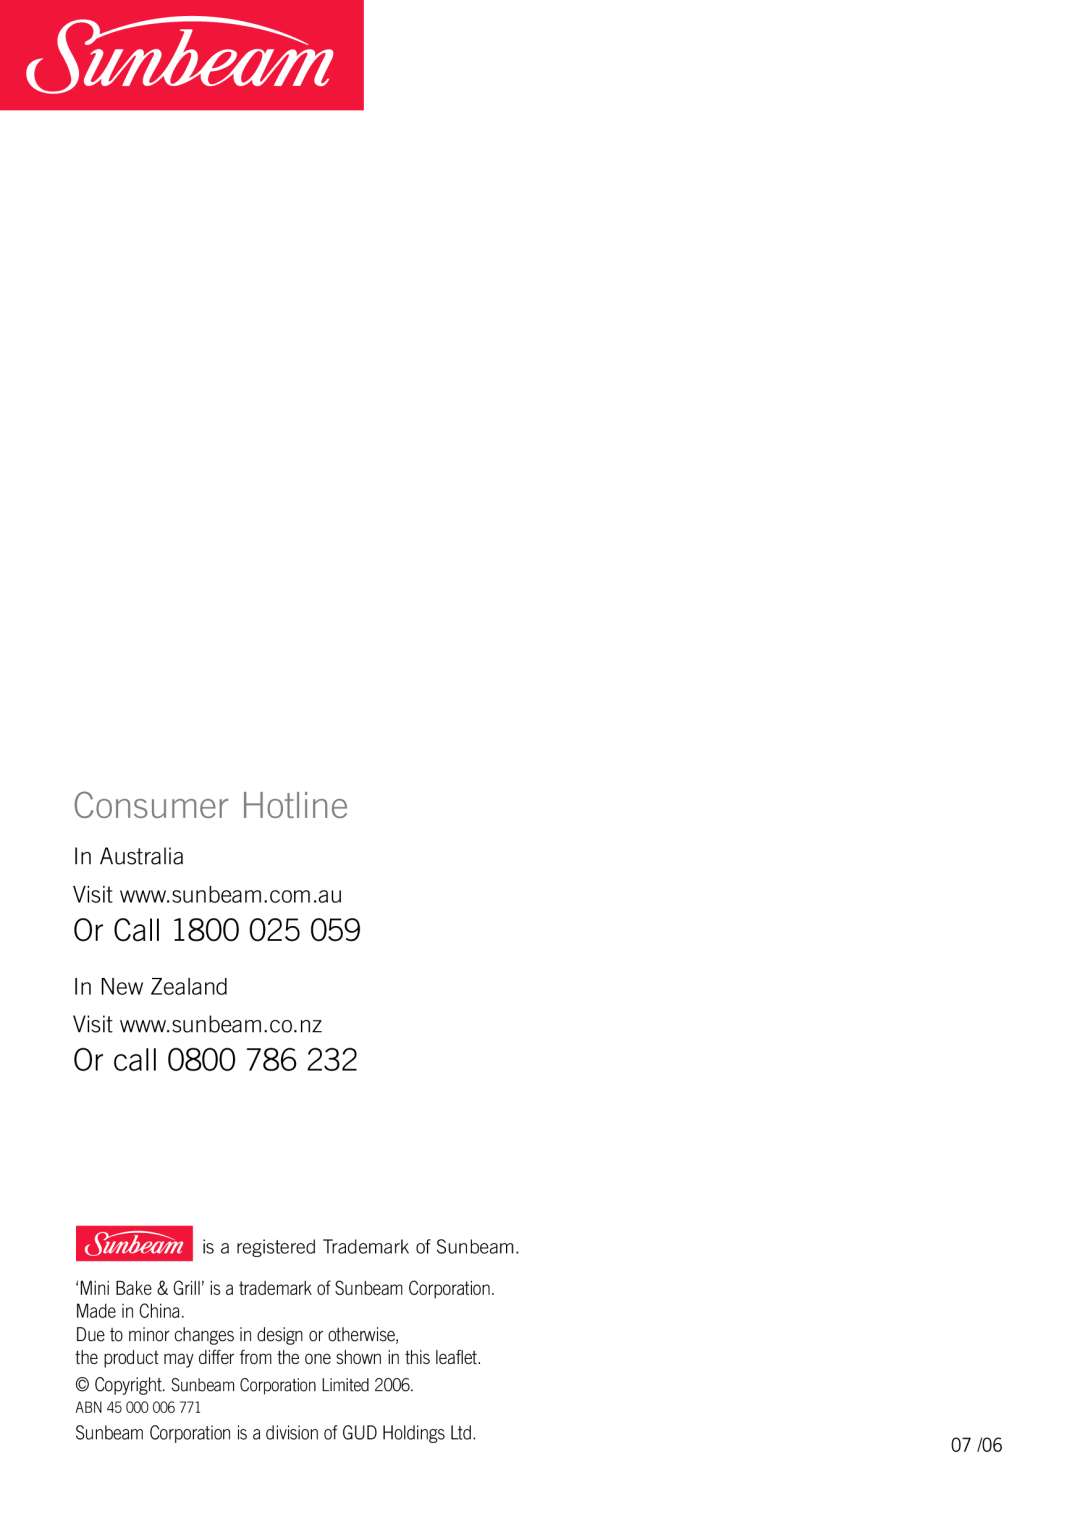 Sunbeam BT2600 manual Consumer Hotline, Or Call 1800, Or call, is a registered Trademark of Sunbeam, 07 /06, ABN 45 000 